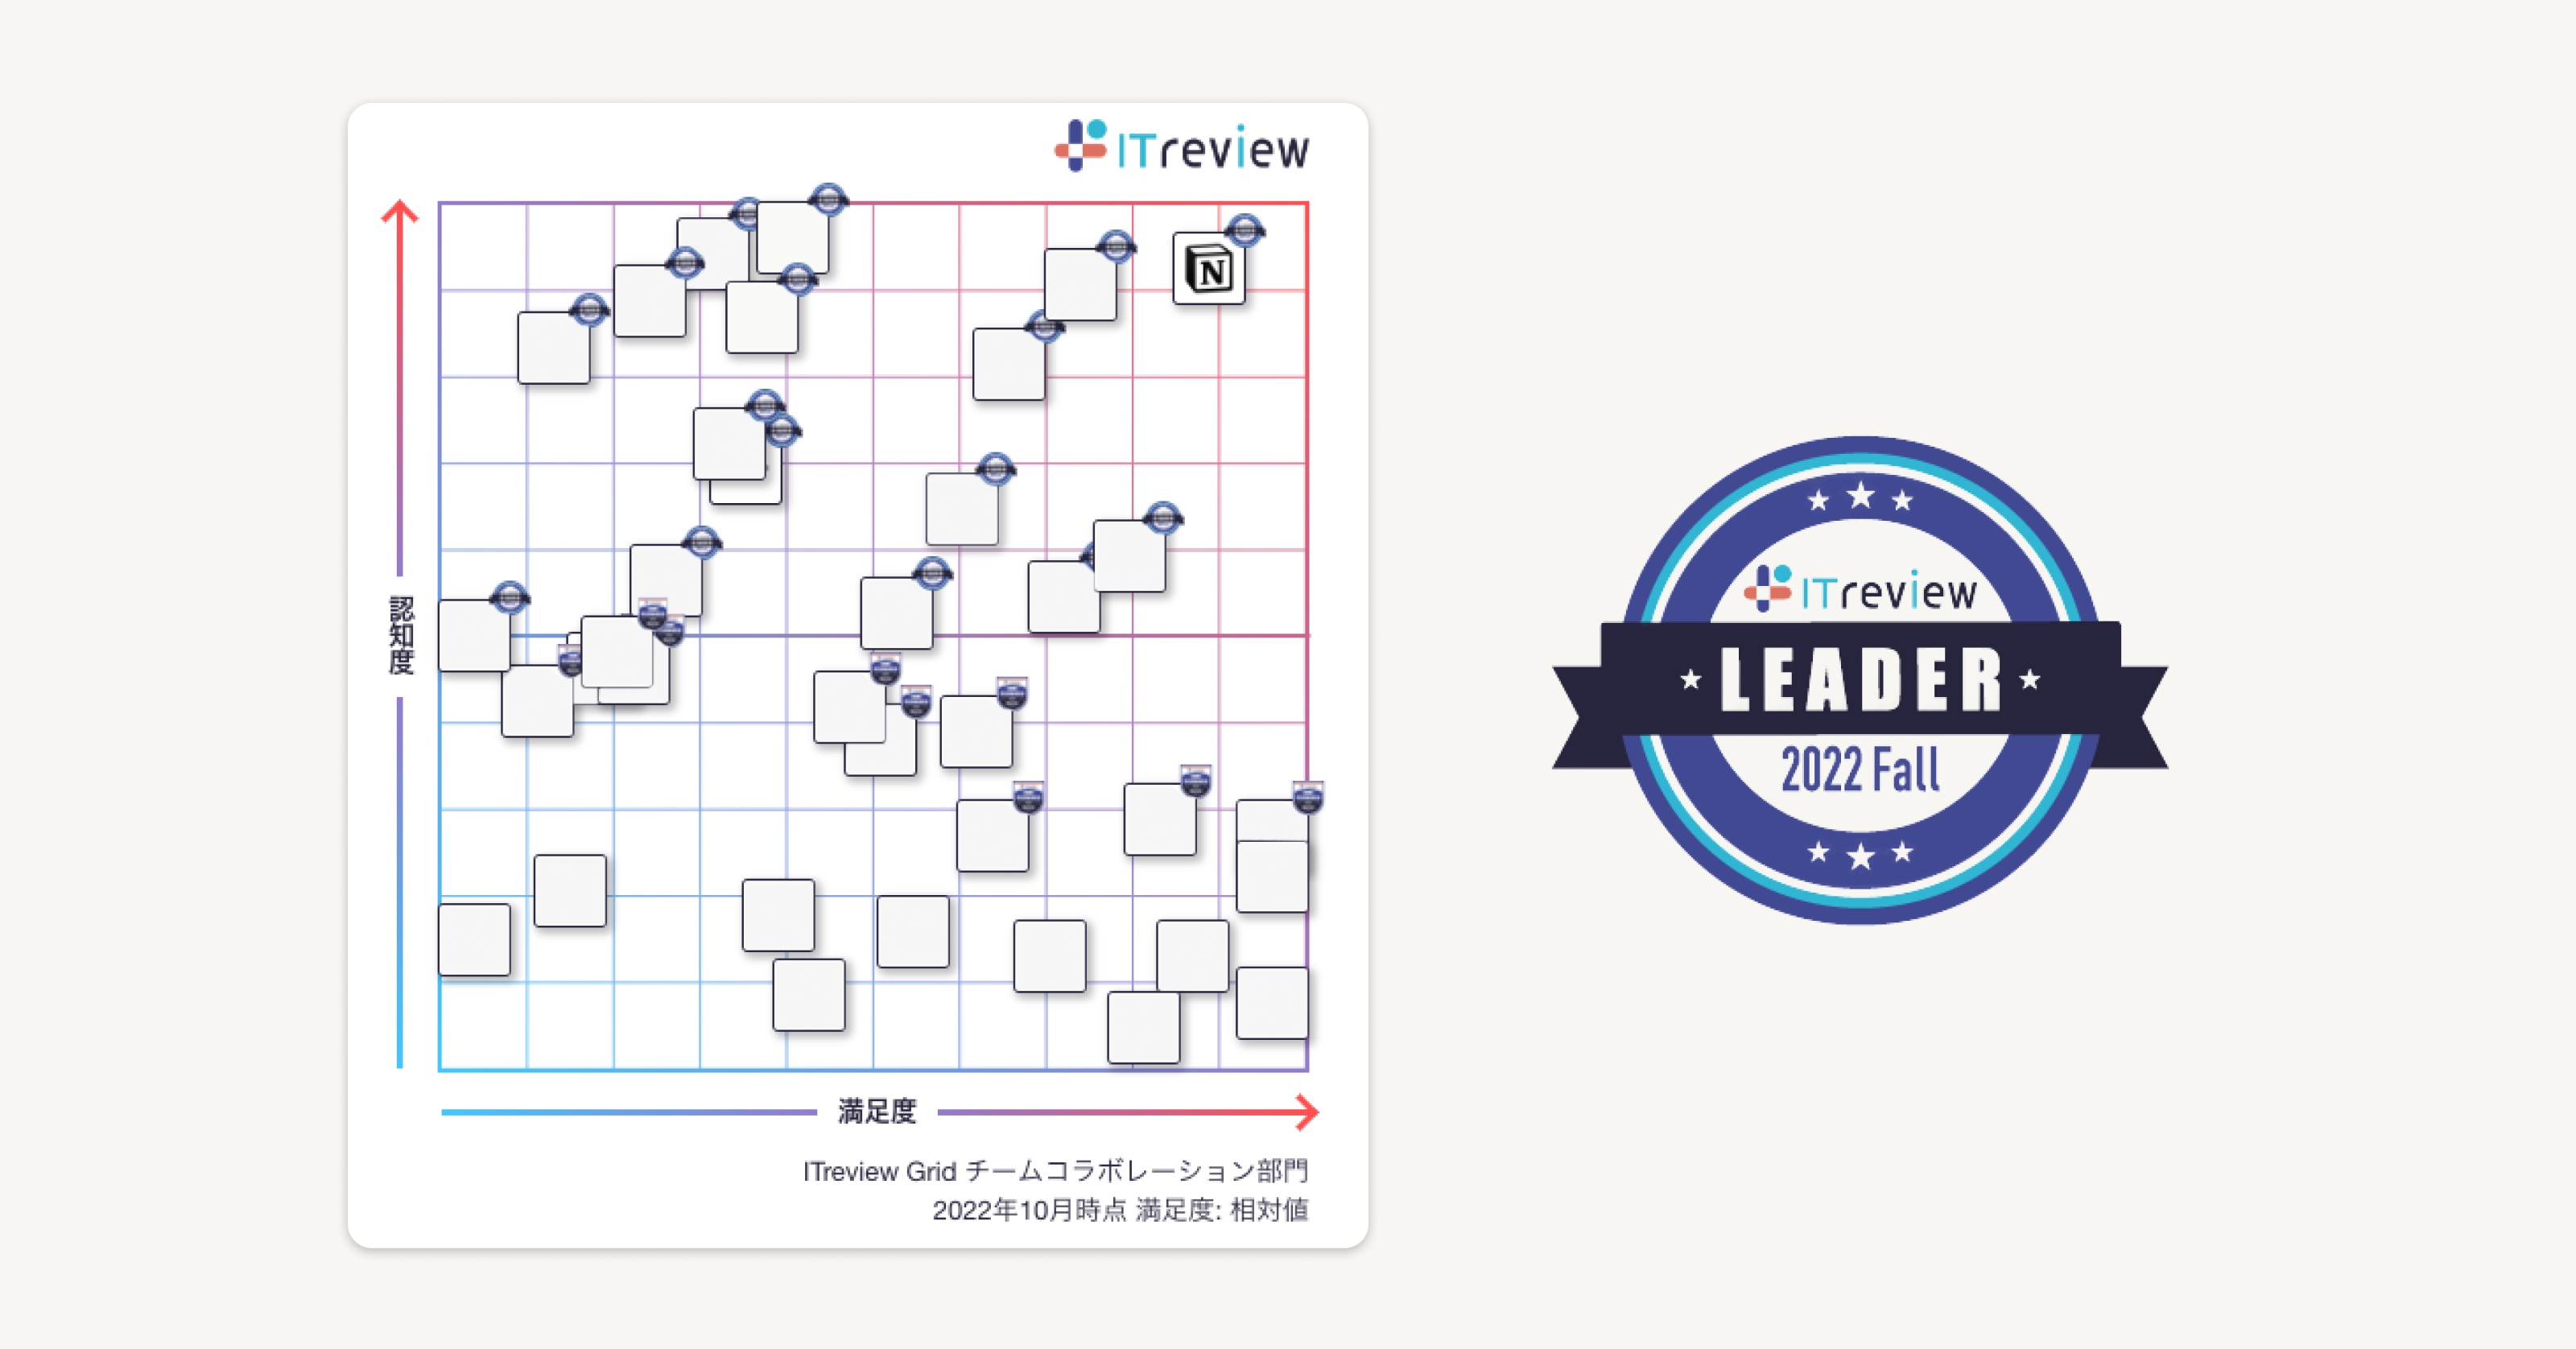 Awarded the "Leader" badge by ITreview